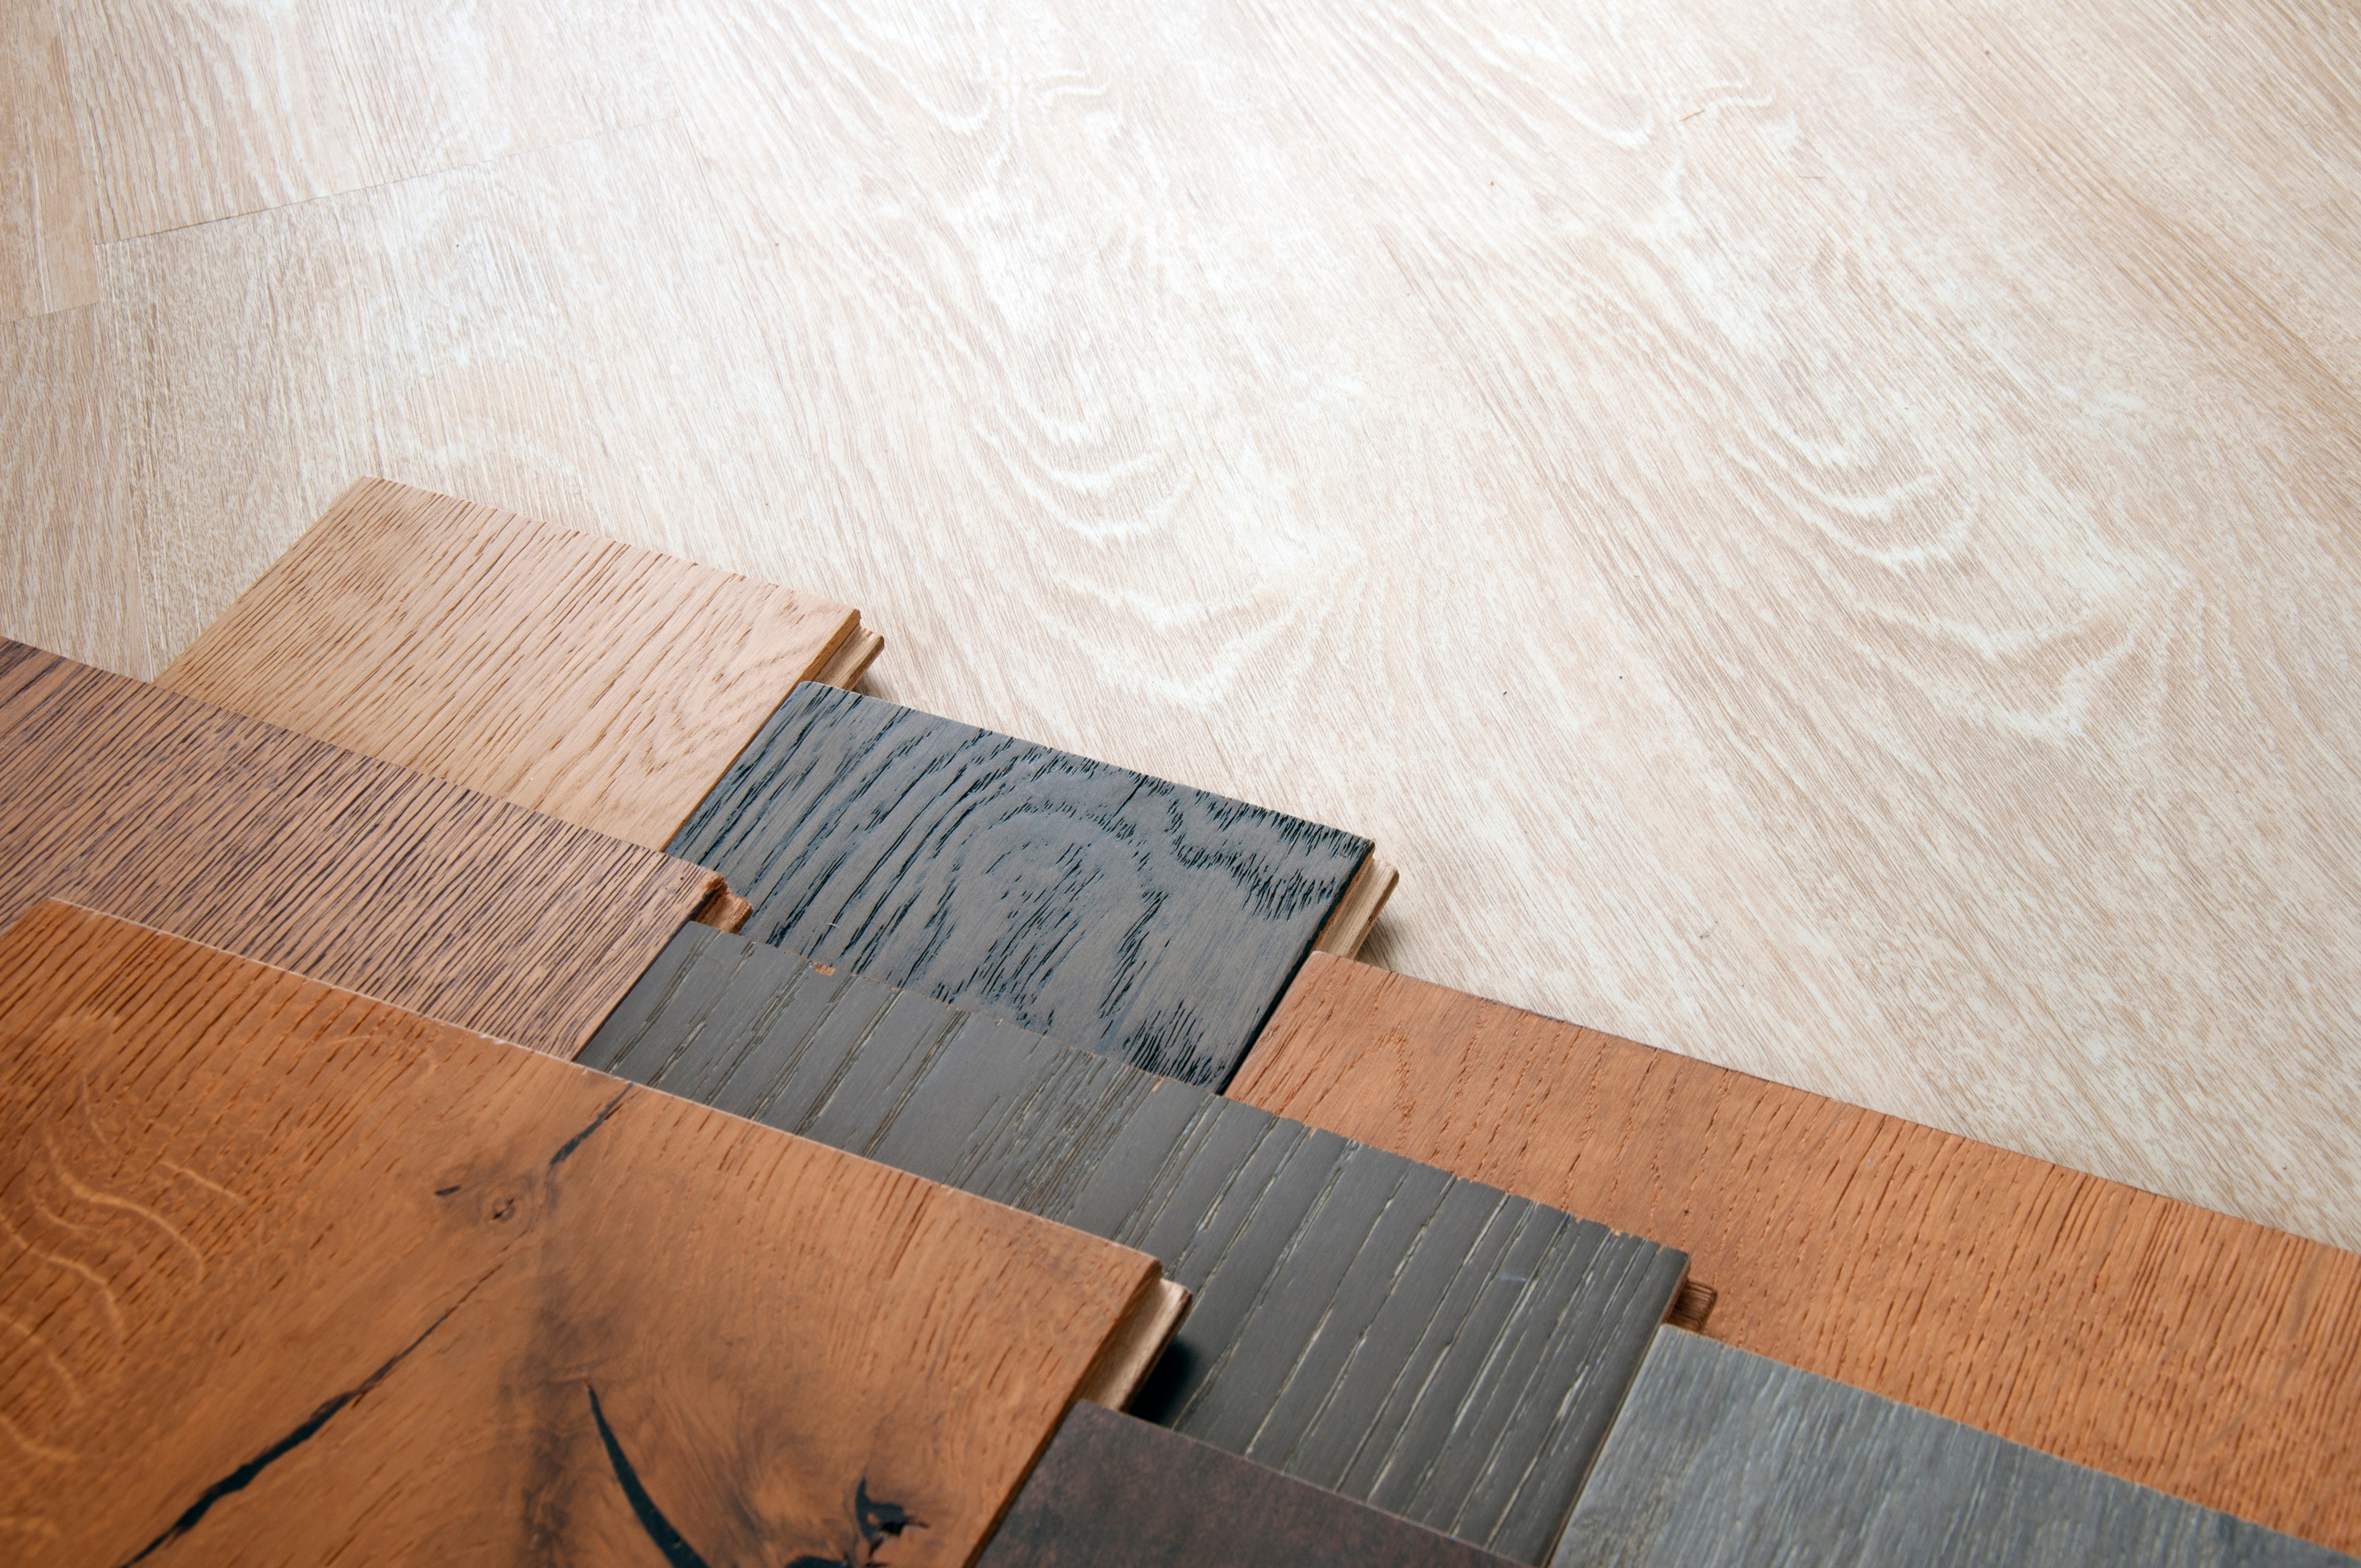 Prefinished Hardwood Flooring Is It, How To Replace Prefinished Hardwood Floor Pieces